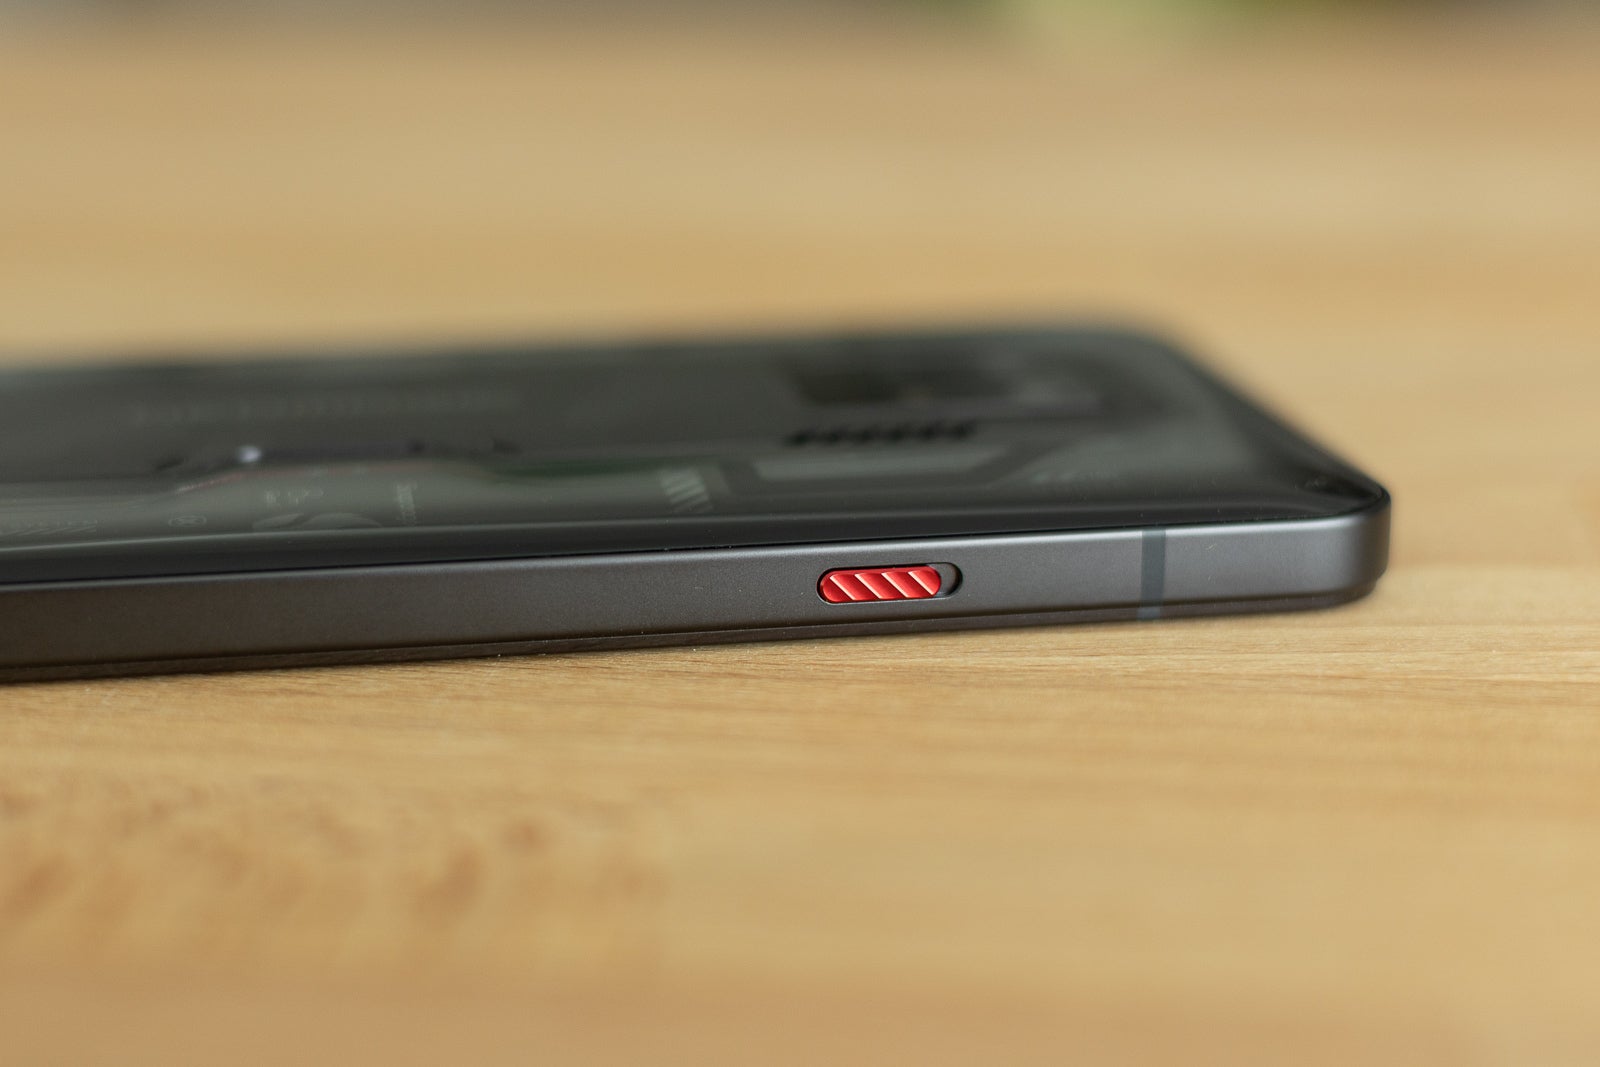 Flick this button for gaming mode - RedMagic 7S Pro gaming phone hands-on: turbofan, activate!